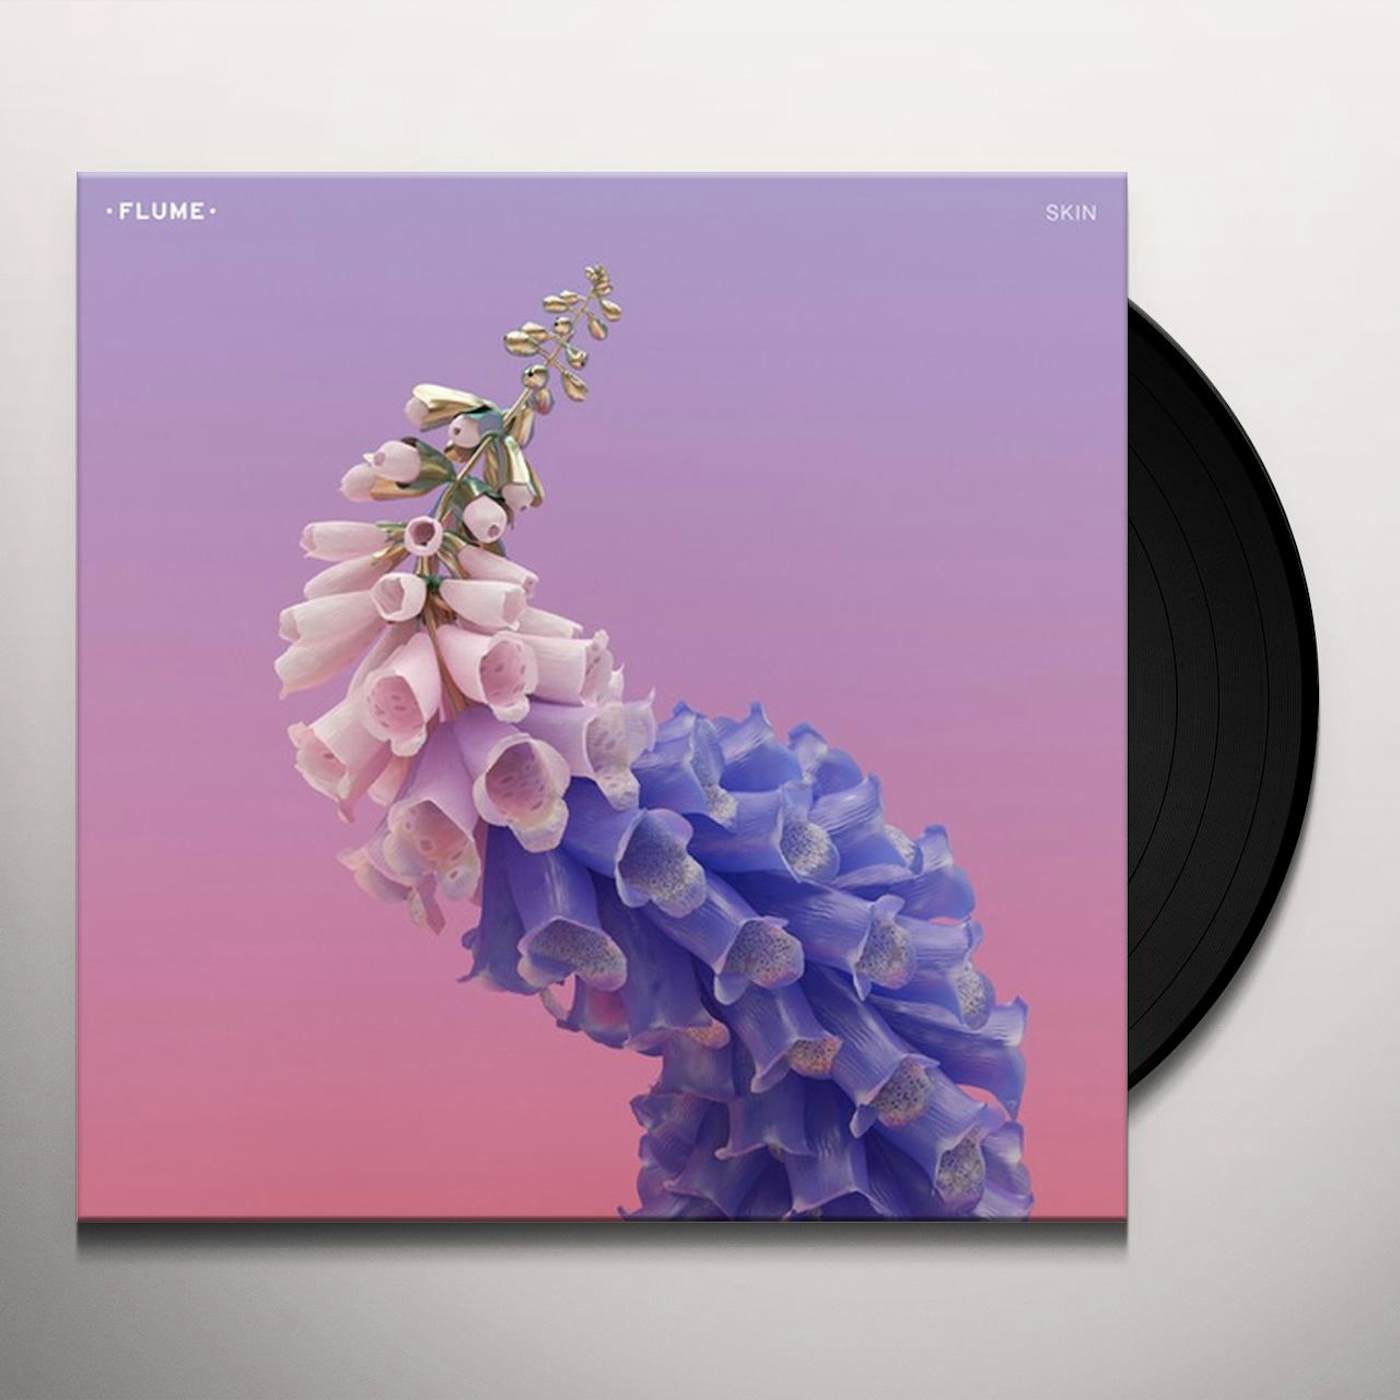 Flume SKIN: LIMITED EDITION Vinyl Record